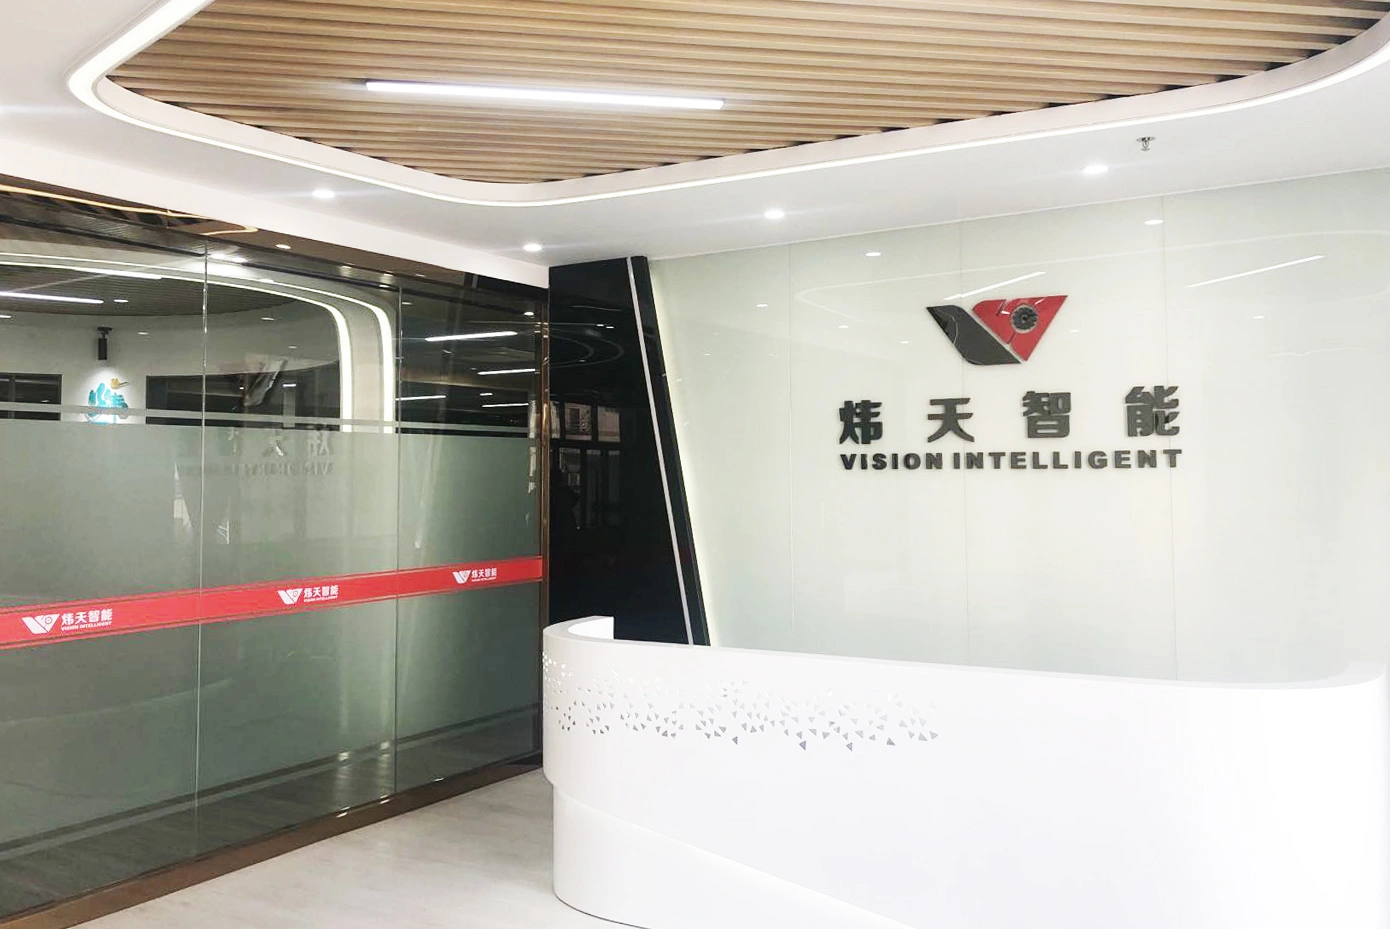 In May 2018, Dongguan Vision Intelligent Equipment Co., Ltd. was established.